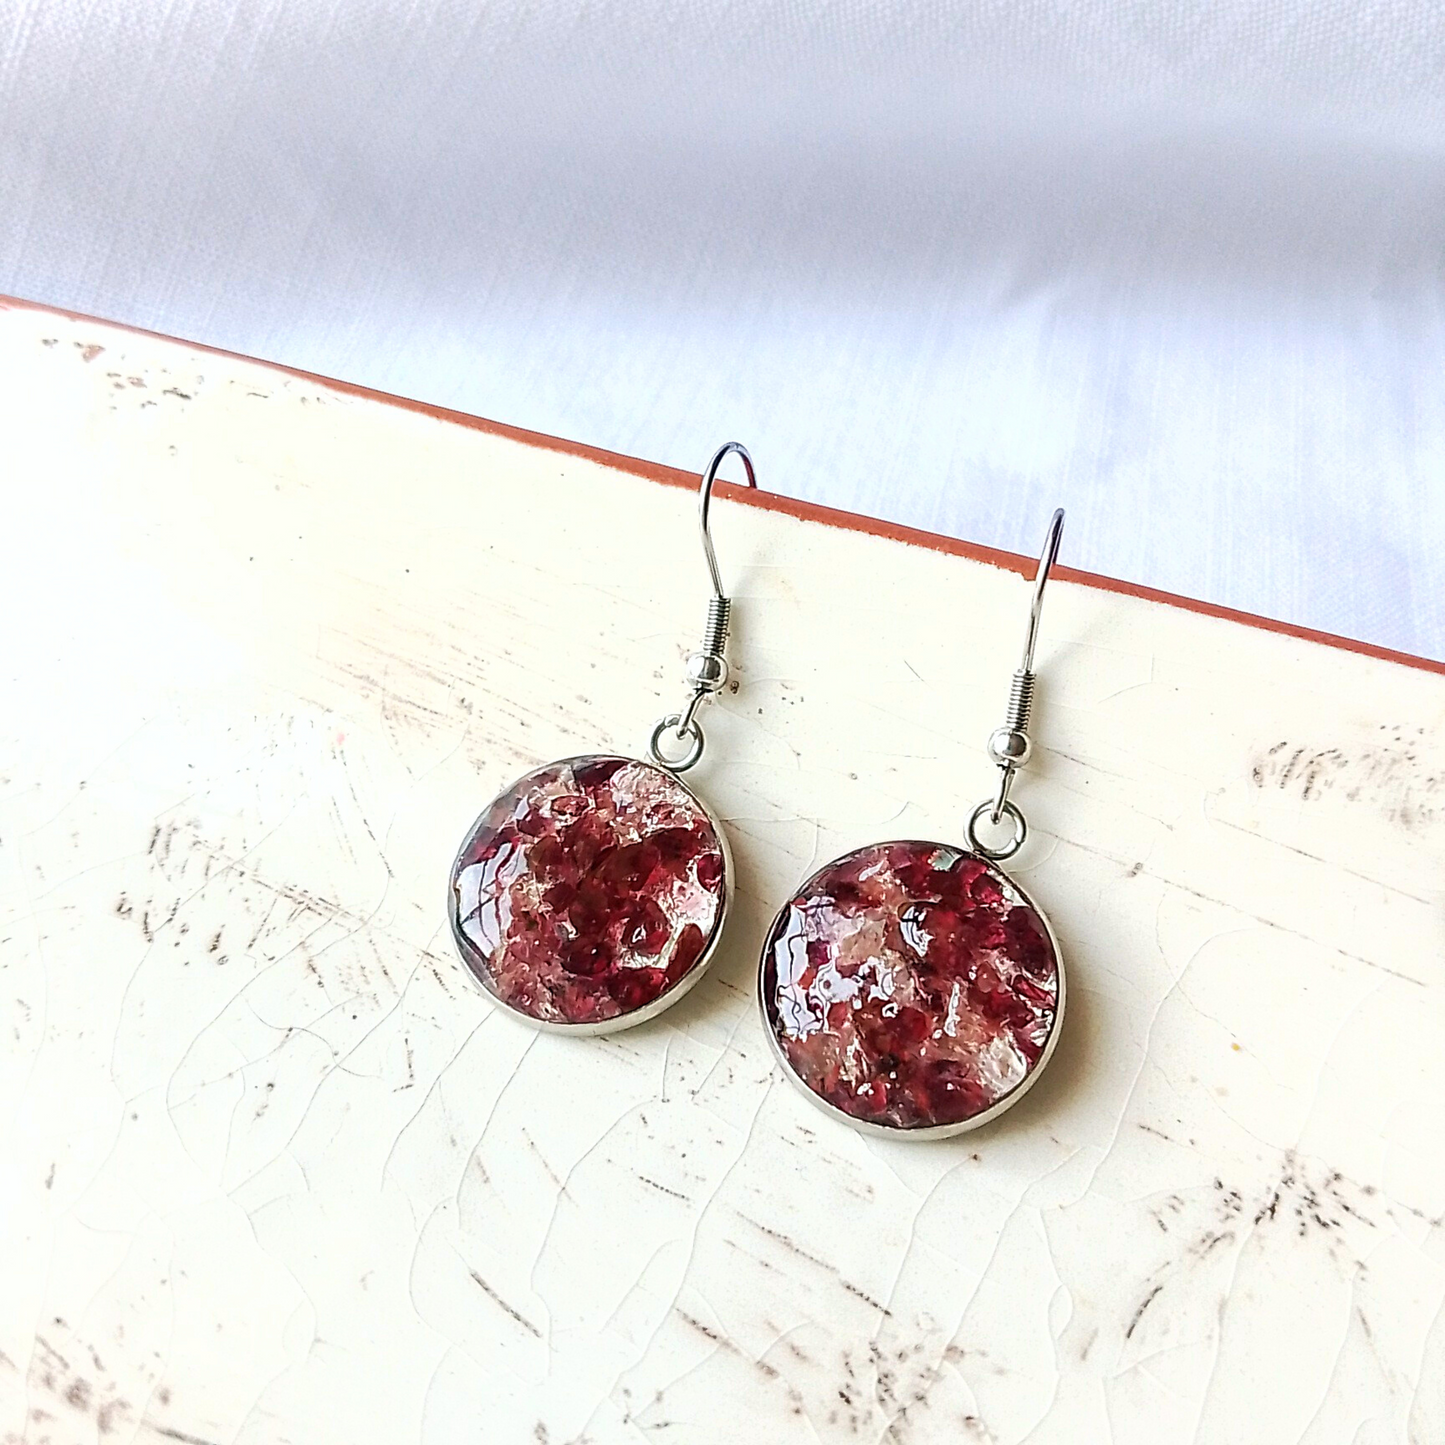 Our exquisite Garnet Birthstone Drop Earrings - designed for those born in January. These unique handmade earrings feature a breathtaking arrangement of garnets set in an 18mm round stainless steel design